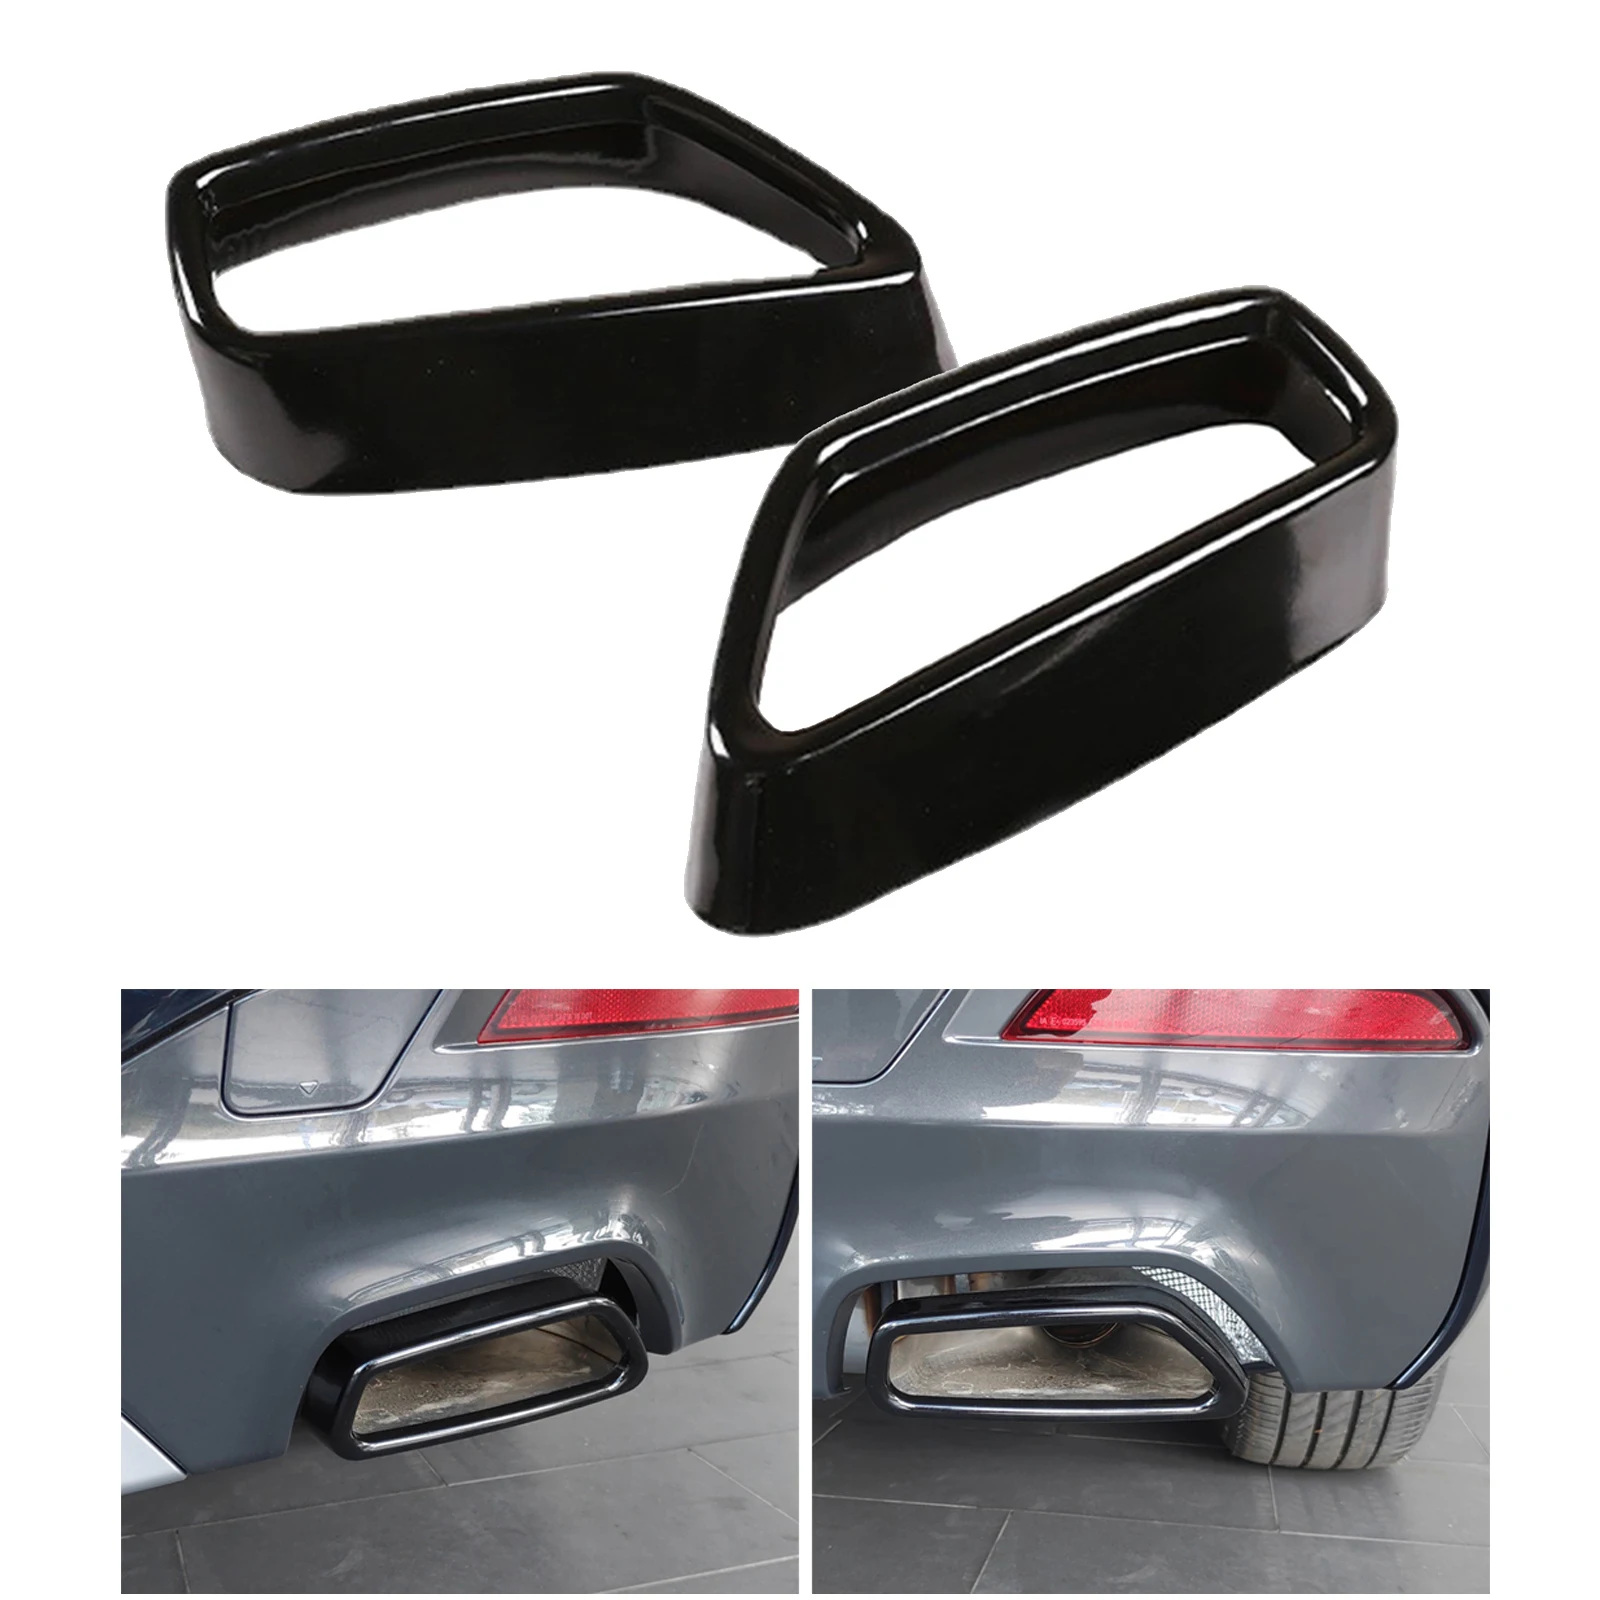 2Pcs Car Rear Exhaust Muffler Pipe Cover Trim fits for BMW 5 G30 G38 2018-2021, Professional